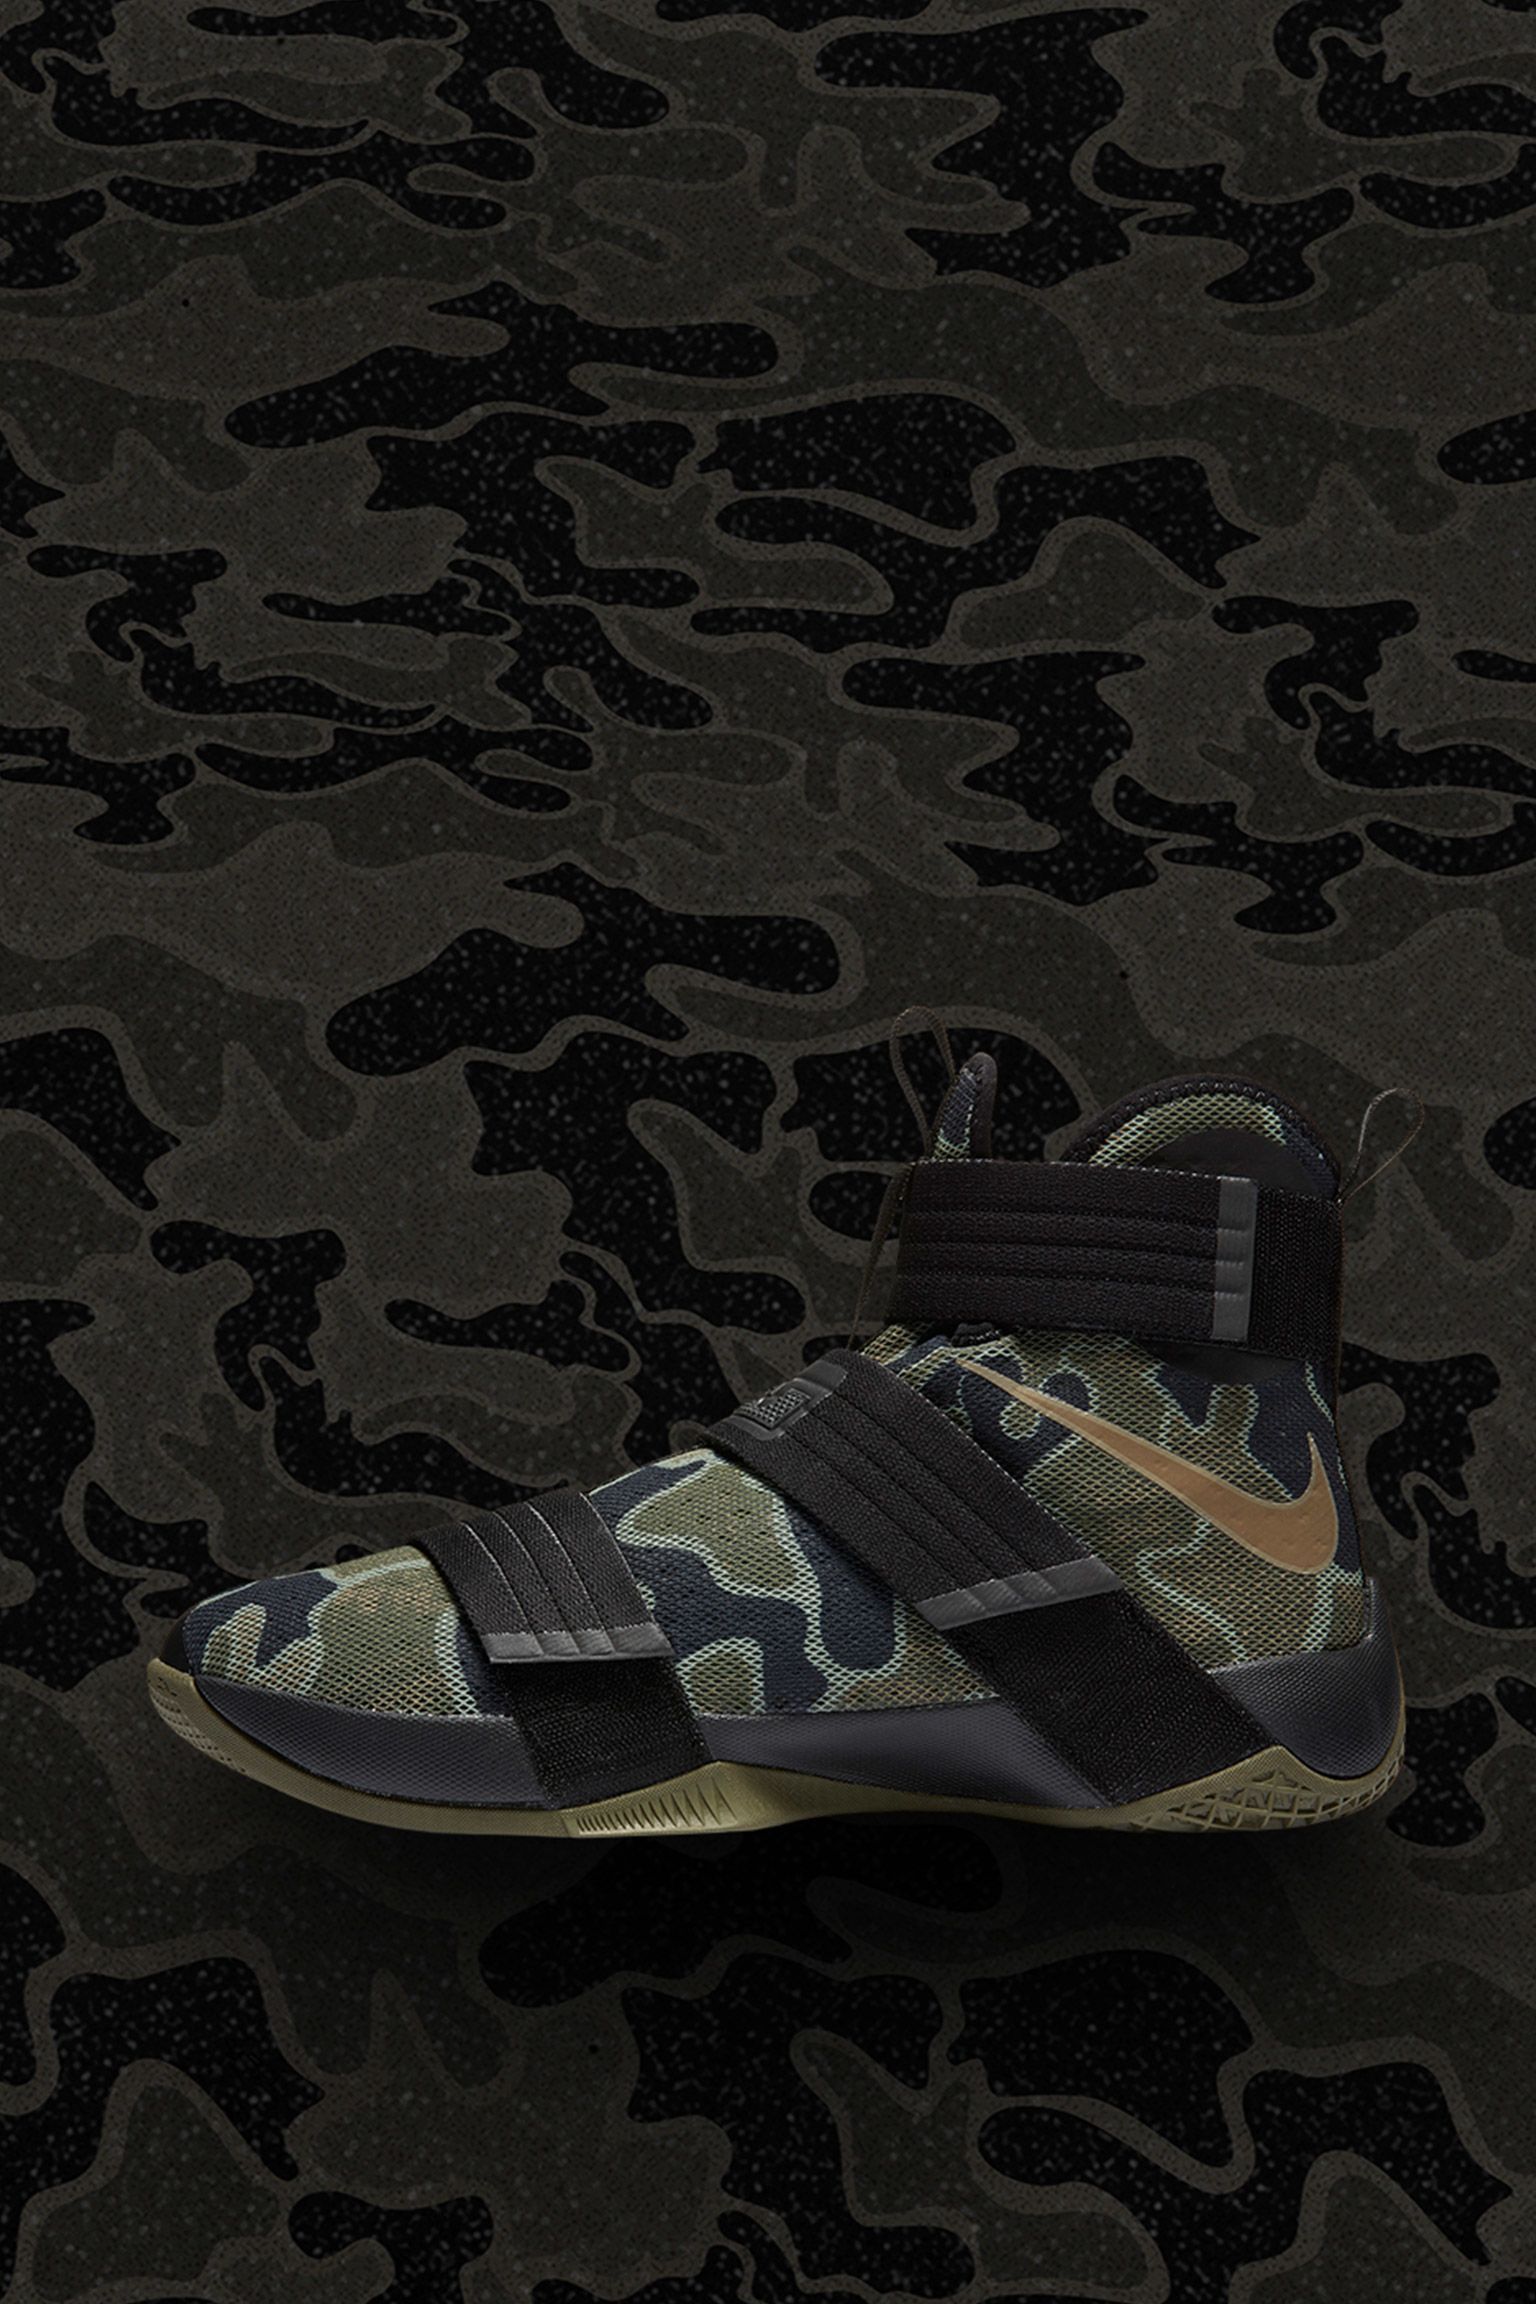 eje hecho Monje Nike Zoom LeBron Soldier 10 'Camo' Release Date. Nike SNKRS